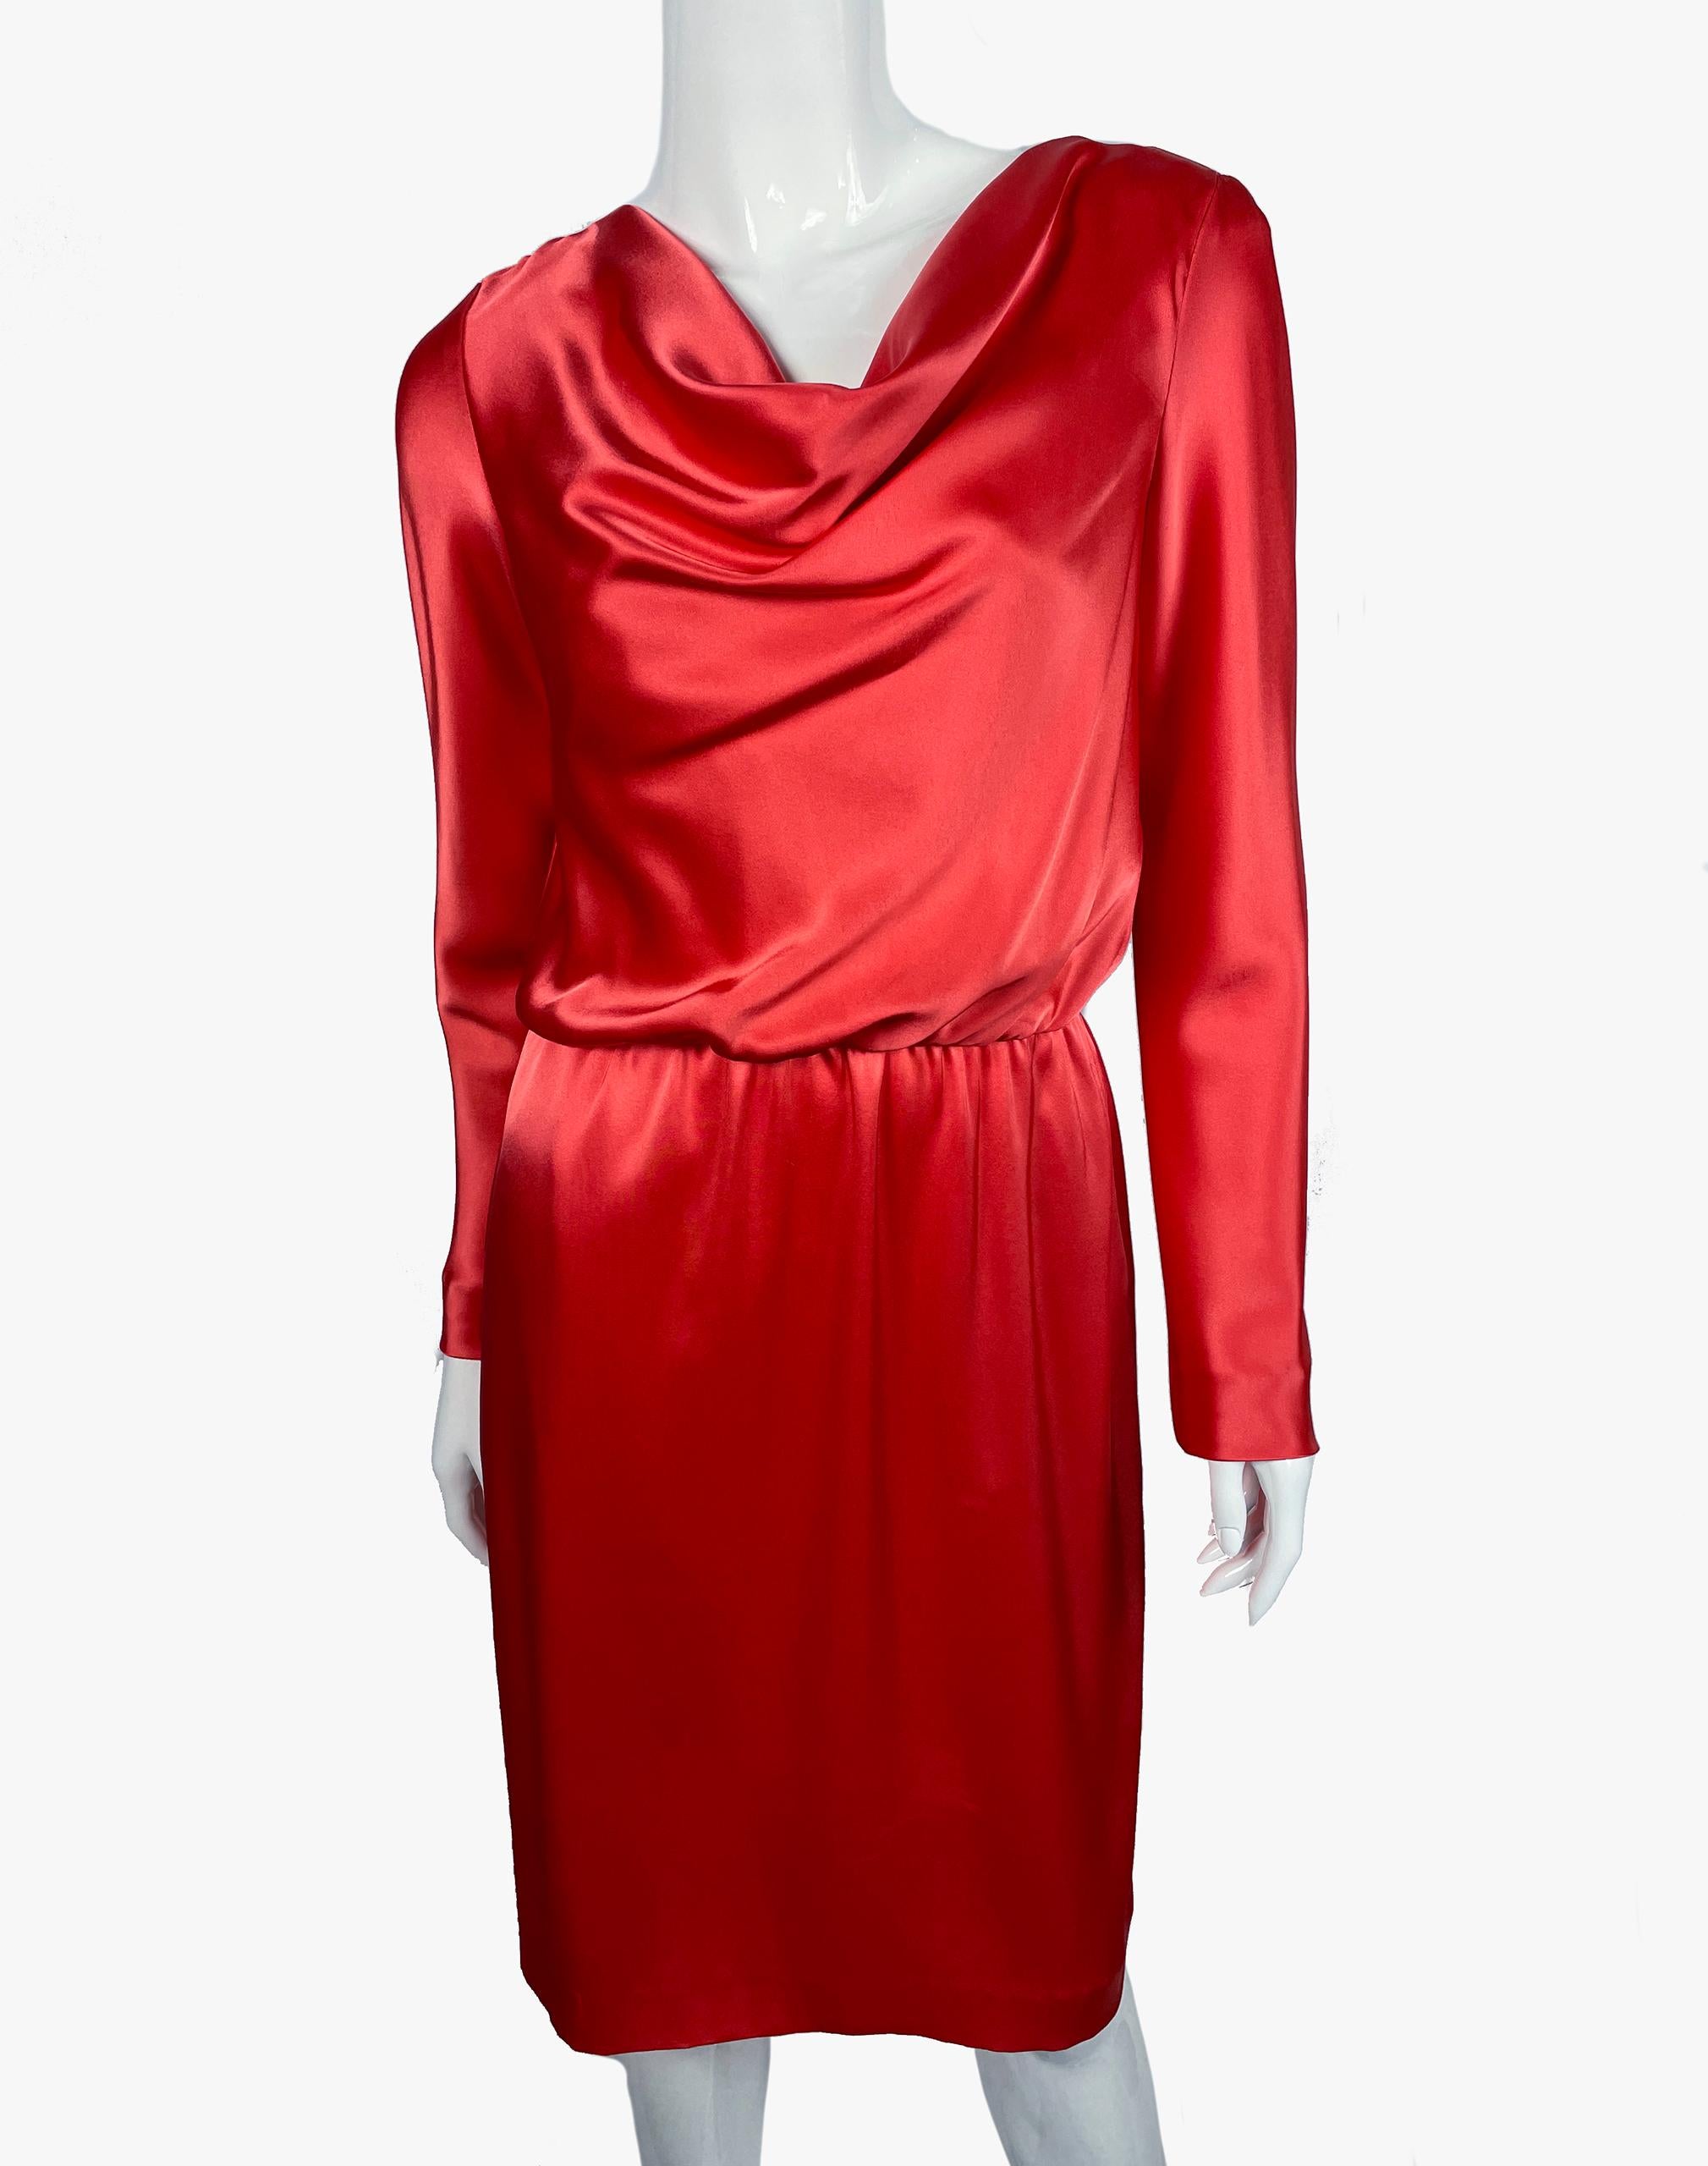 Vintage St. John Couture cowl neck red dress with beautiful neckline on the back

Additional information:
Fabric: 78% Triacetate, 22% Polyester; Lining 95% Silk, 5% Spandex
Size: M /US 6
Bust: 35″/89 cm
Waist: 24″/61 cm
Hip: 37″/94 cm
Length: 39″/99